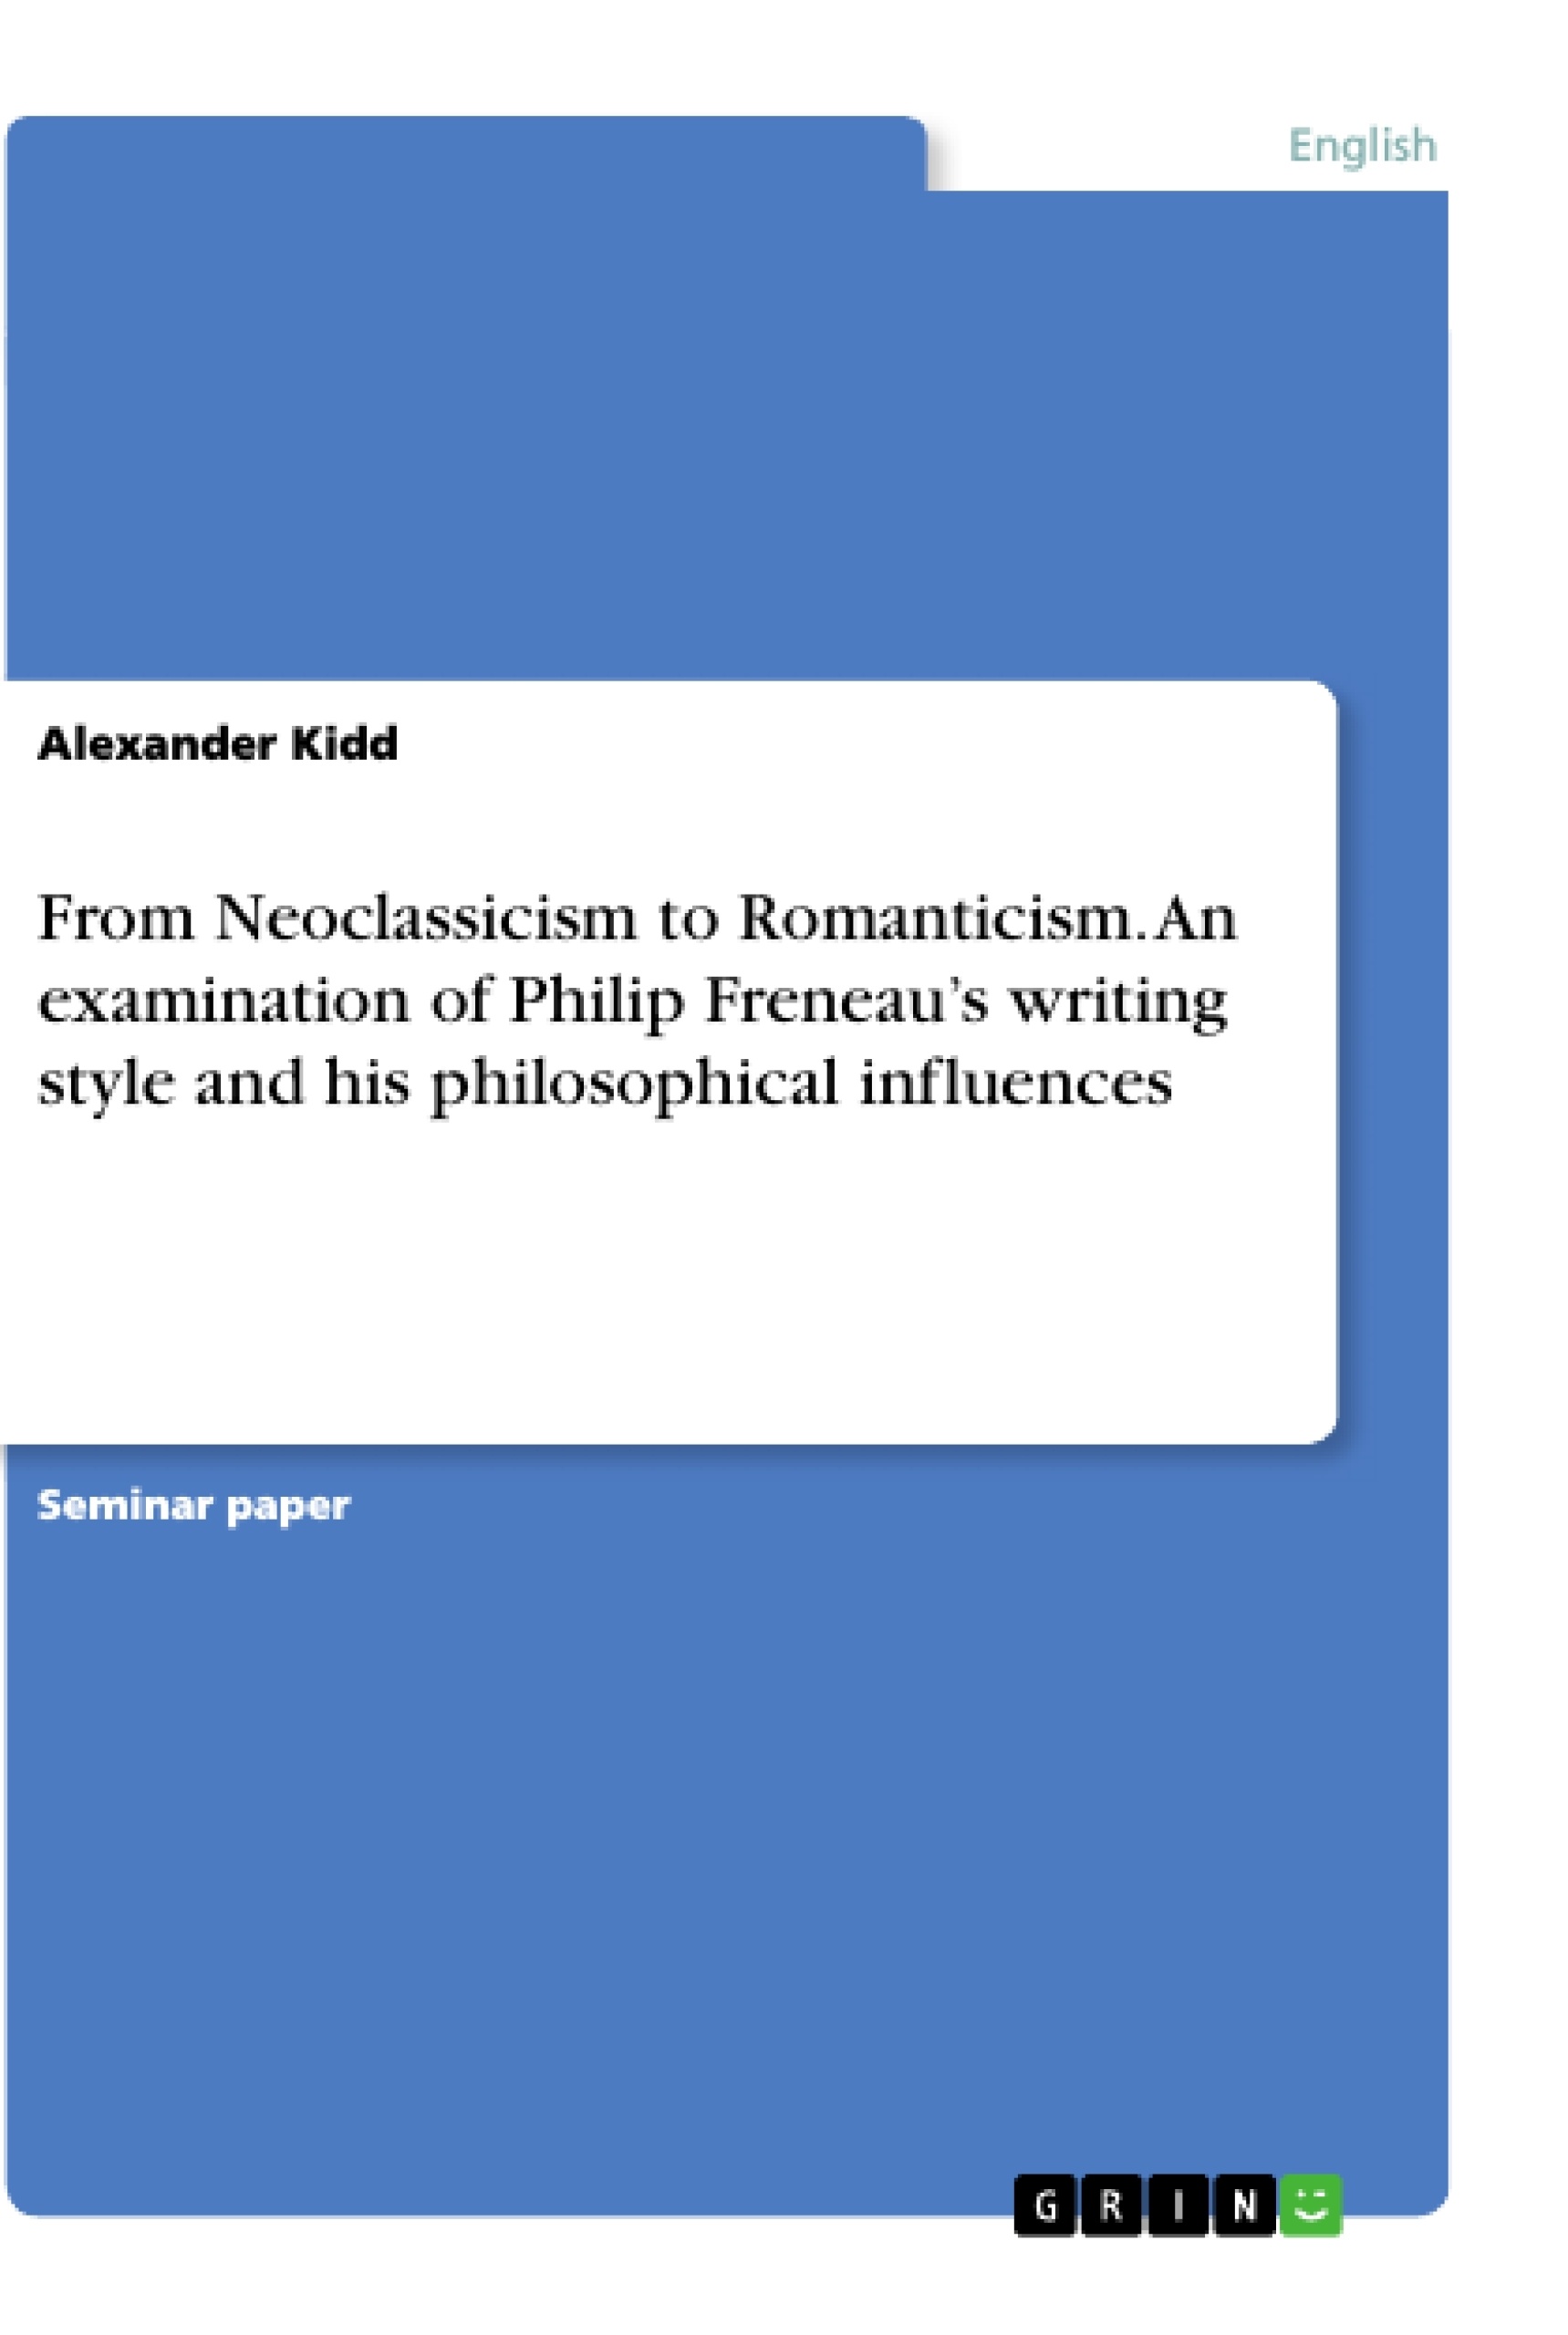 Title: From Neoclassicism to Romanticism. An examination of Philip Freneau’s writing style and his philosophical influences